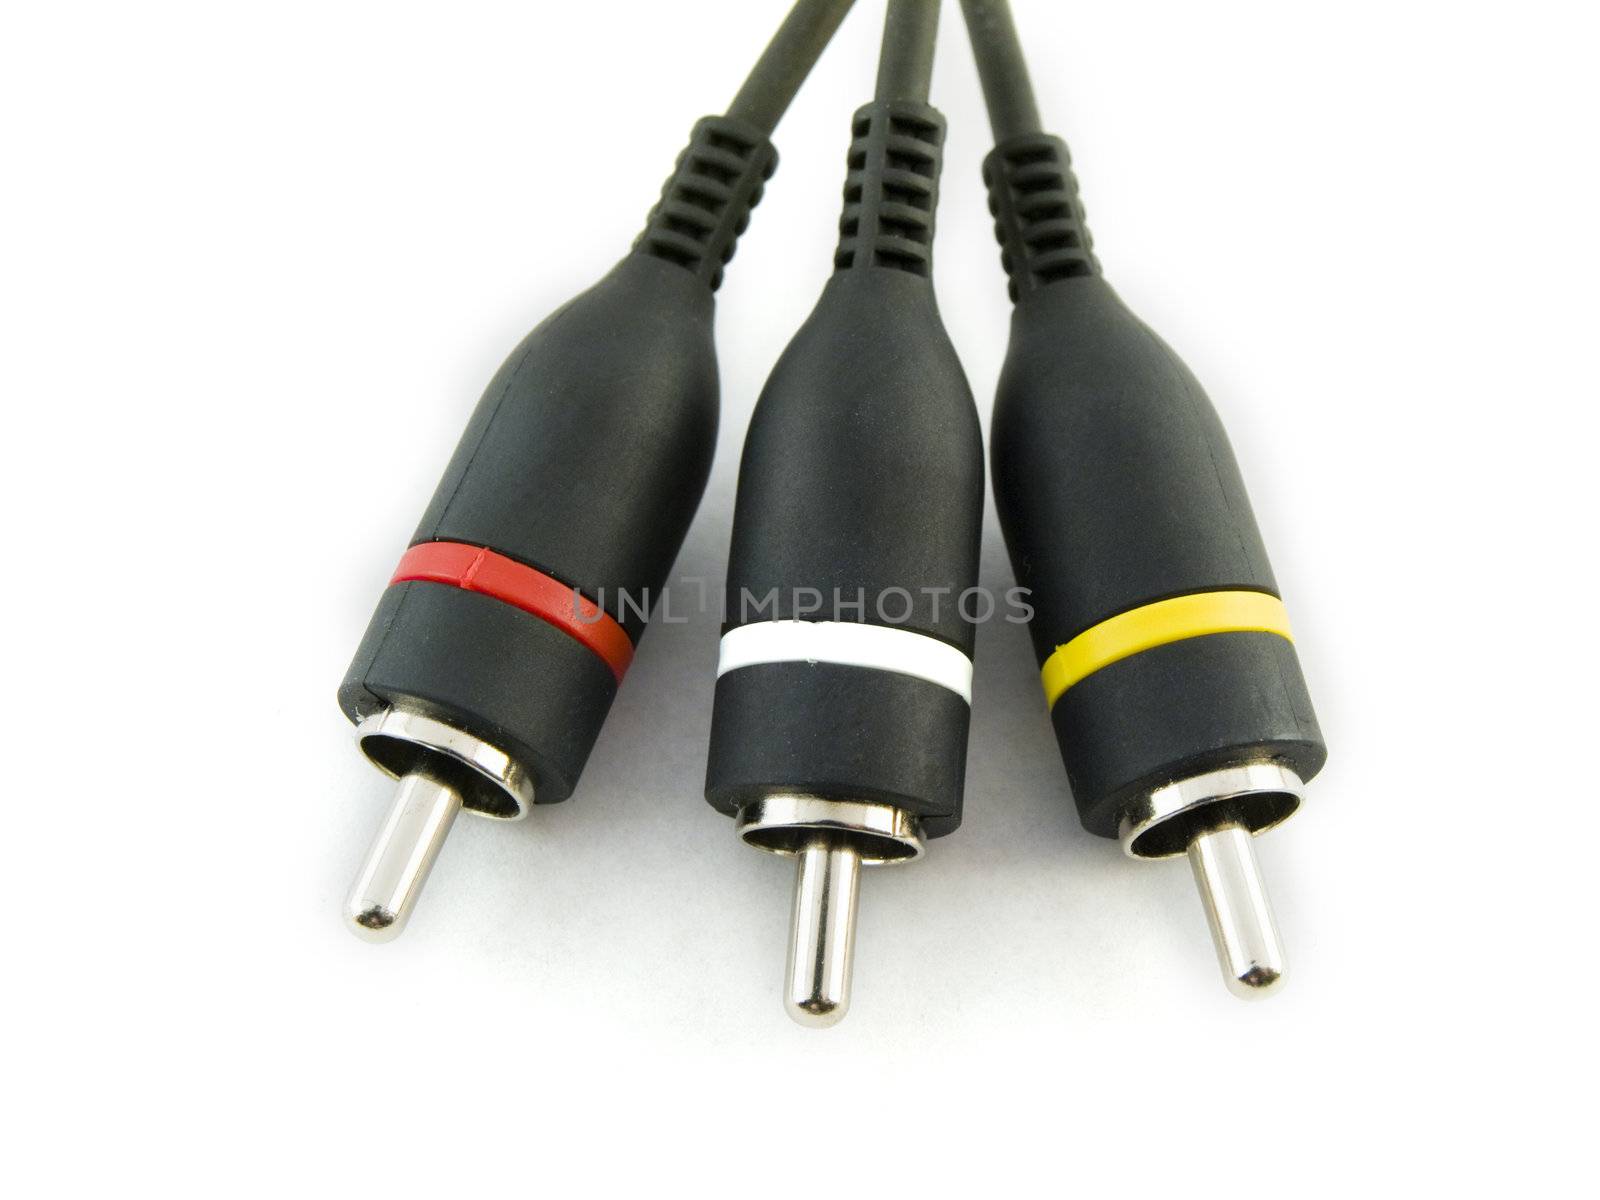 Red Yellow and White Audio Visual Leads on White Background